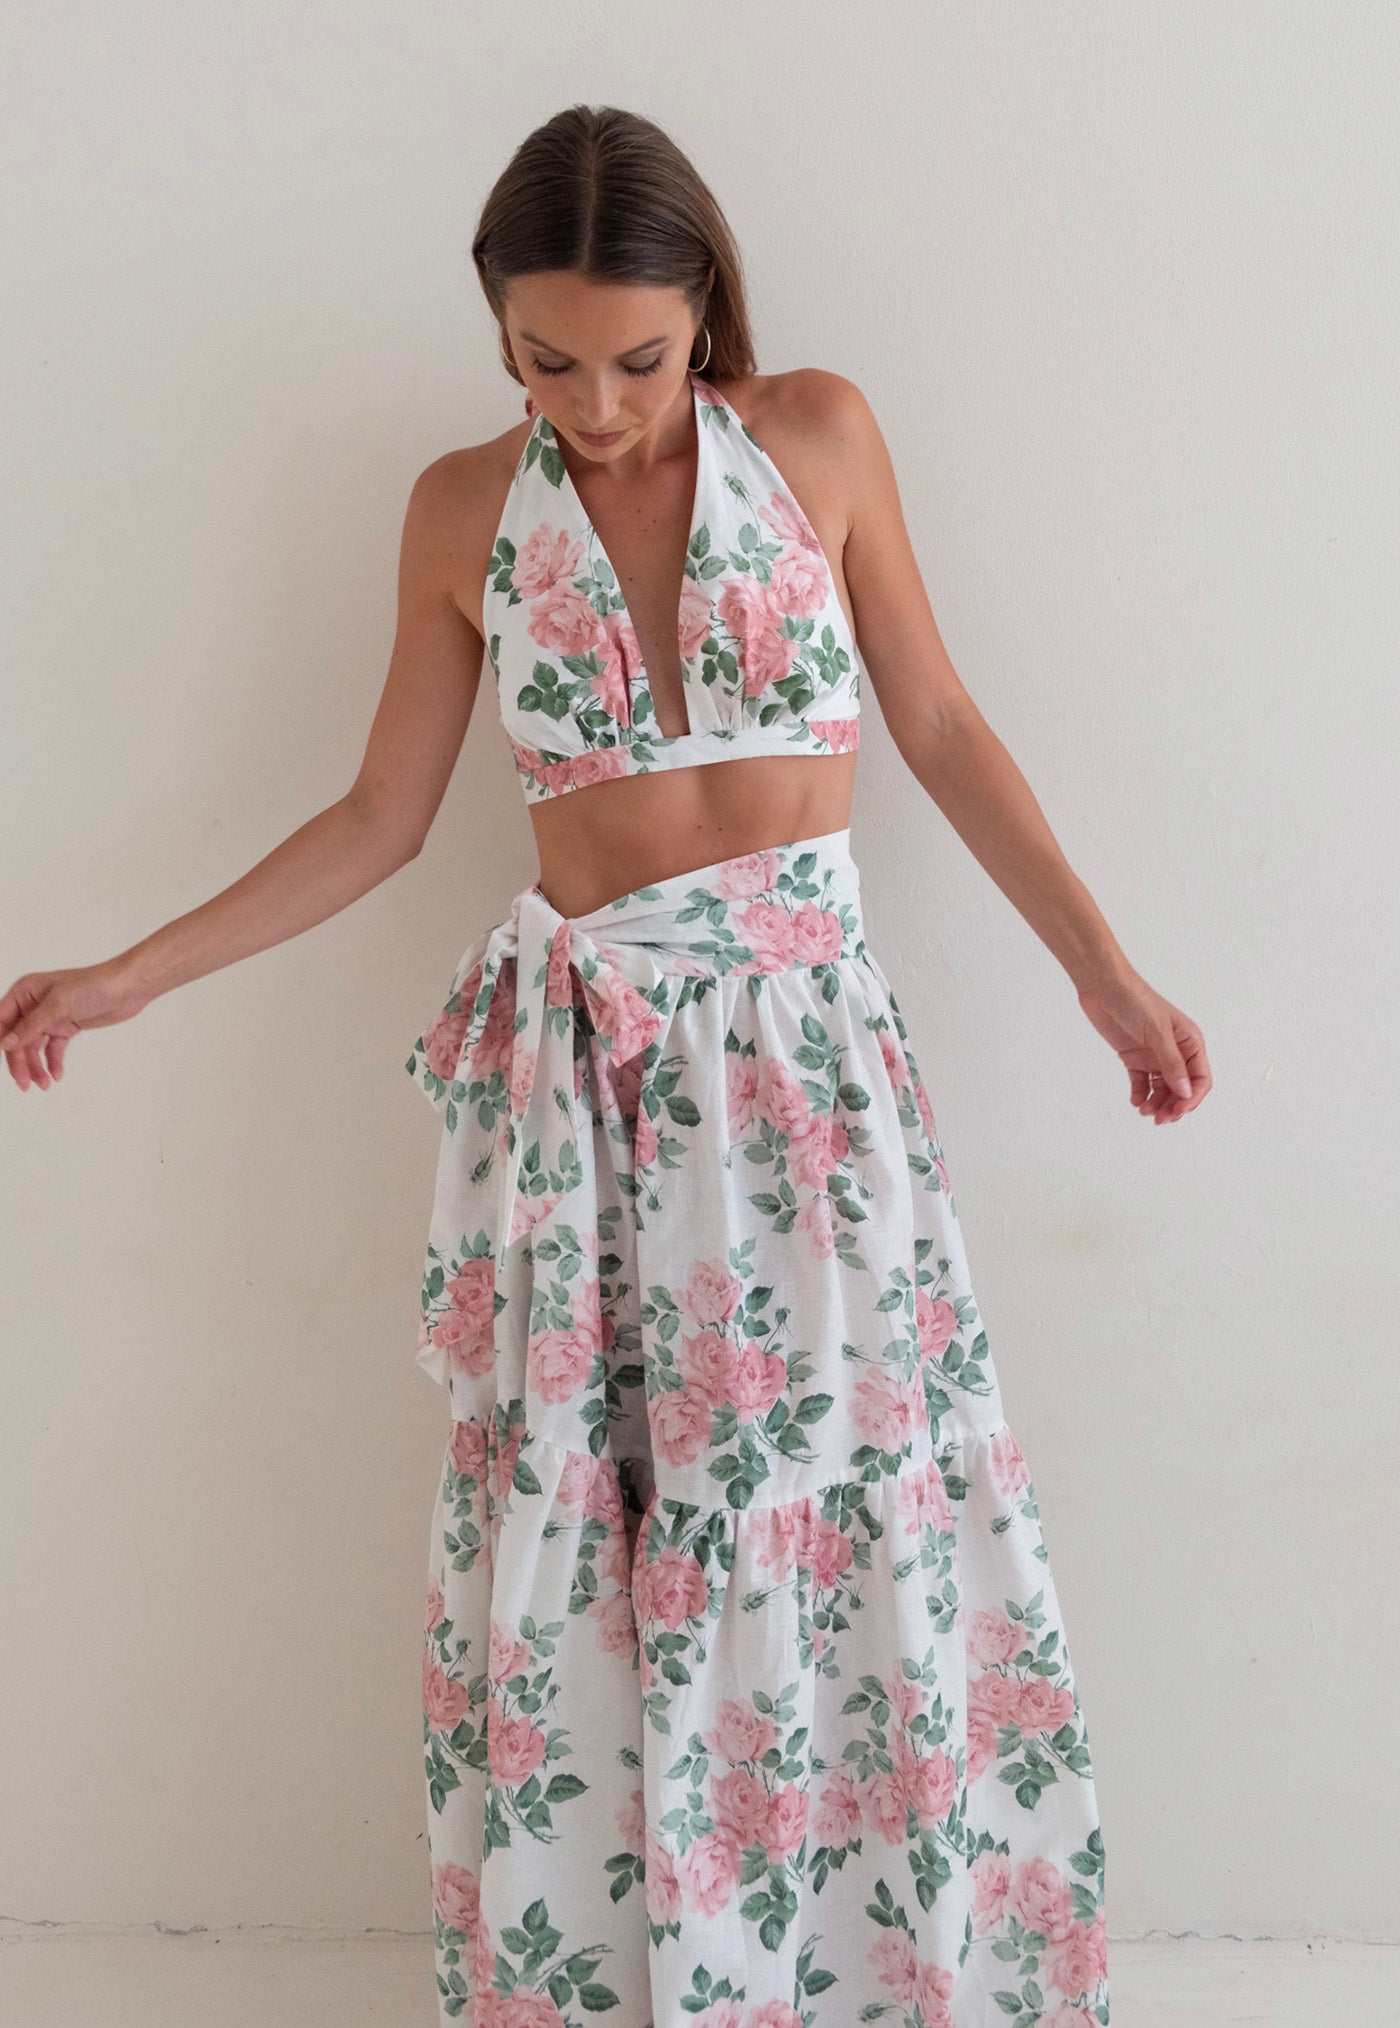 Still The One Skirt - Pink Floral sold by Angel Divine